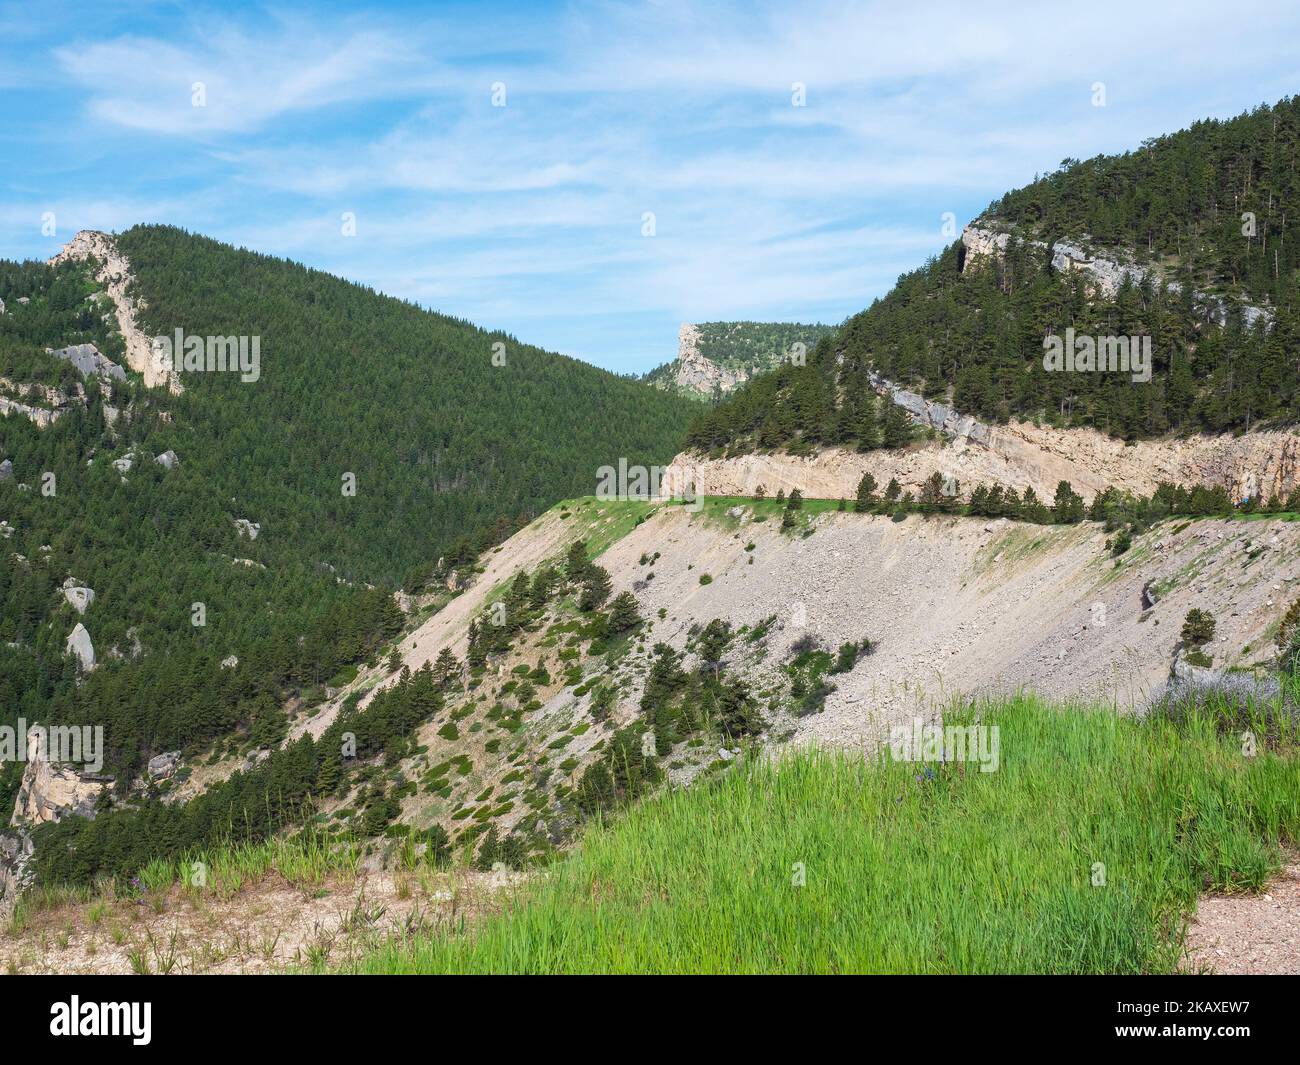 Coniferous woodland, from the viewpoint on Highway 14 Scenic Byway, Bighorn National Forest, Wyoming, USA, July 2019 Stock Photo